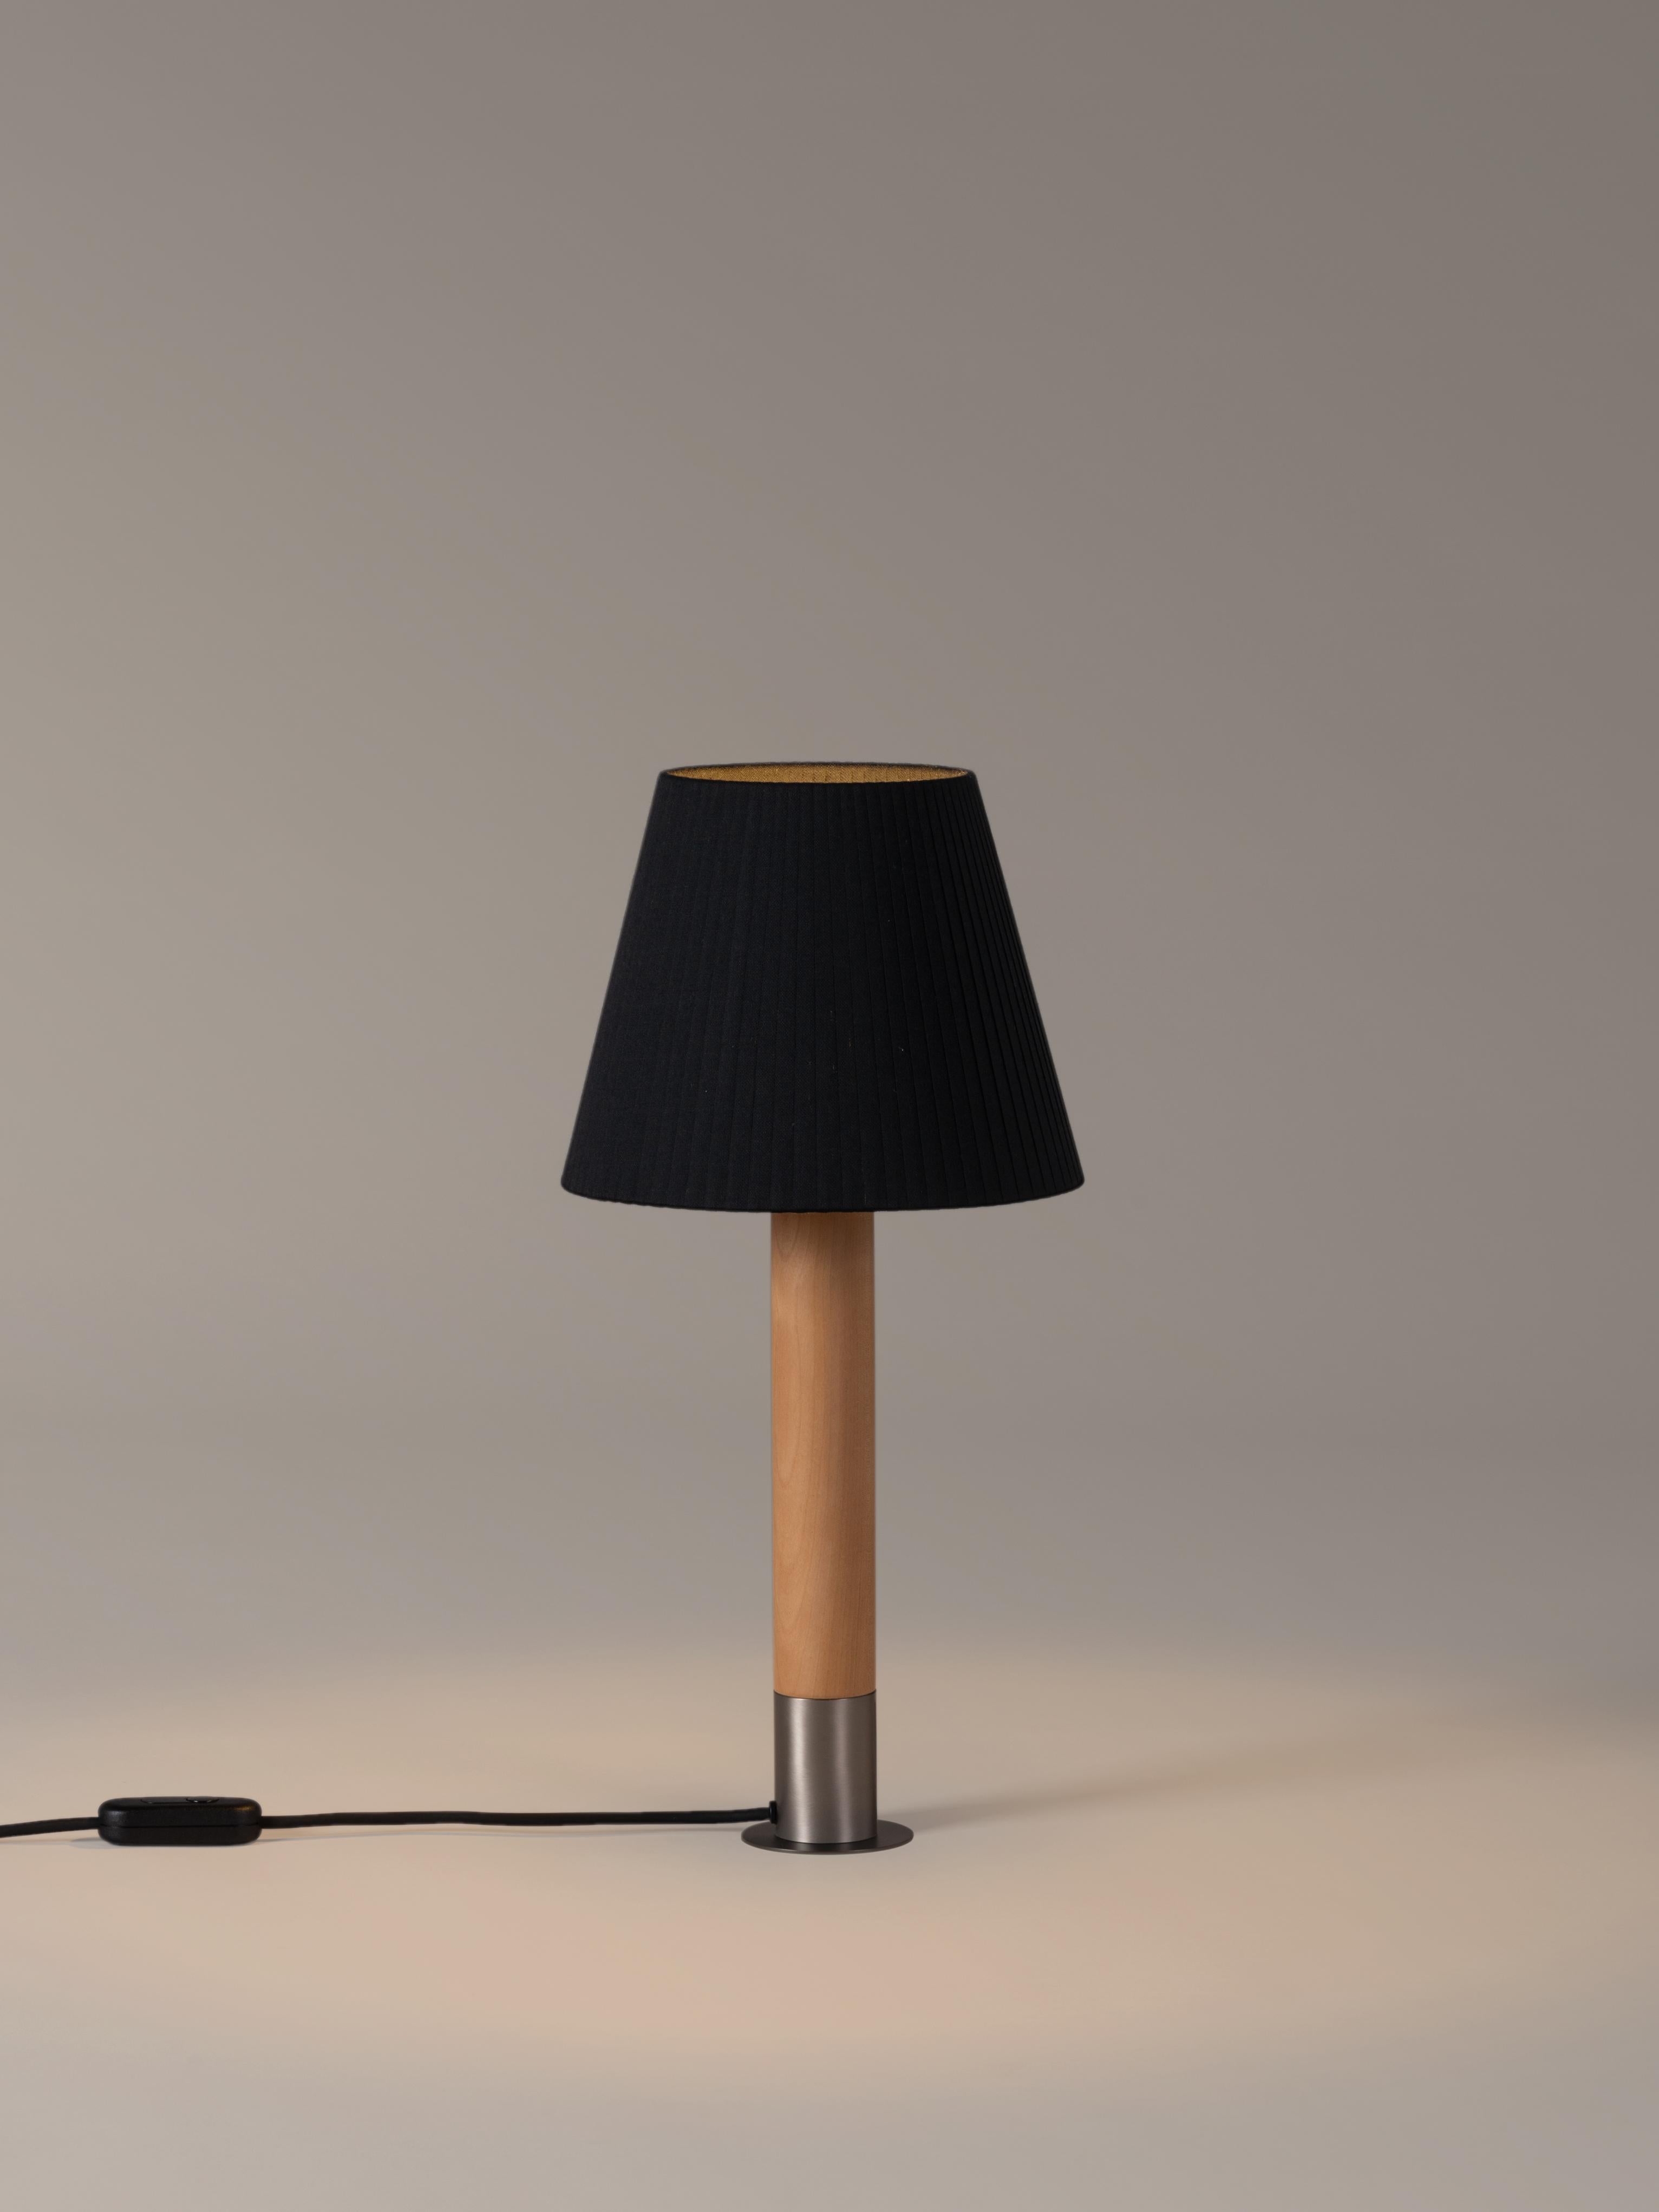 Nickel and Black Básica M1 table lamp by Santiago Roqueta, Santa & Cole
Dimensions: D 25 x H 52 cm
Materials: Nickel, birch wood, ribbon.
Available in other shade colors and with or without the stabilizing disc.
Available in nickel or